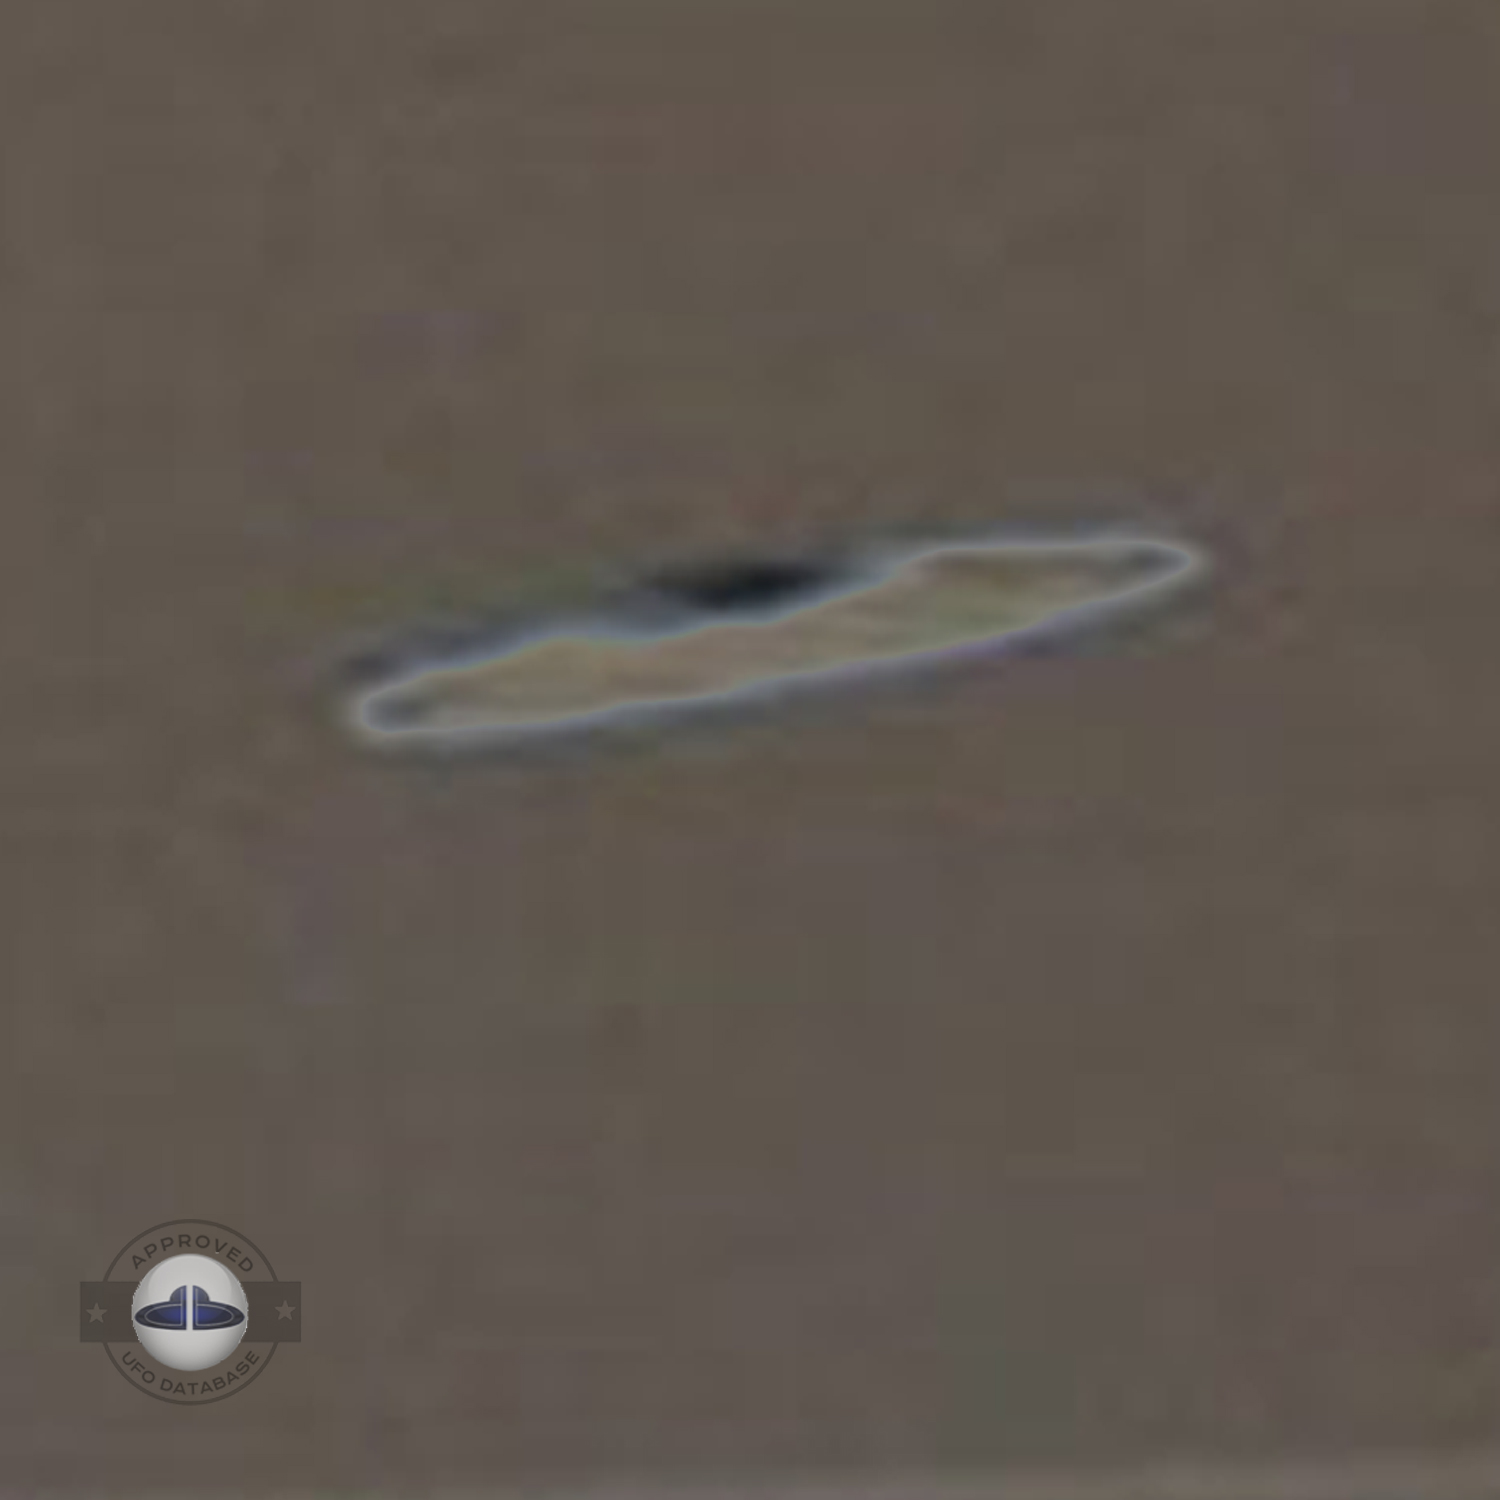 The flying saucer is flying over an industrial factory in Baghdad UFO Picture #58-6